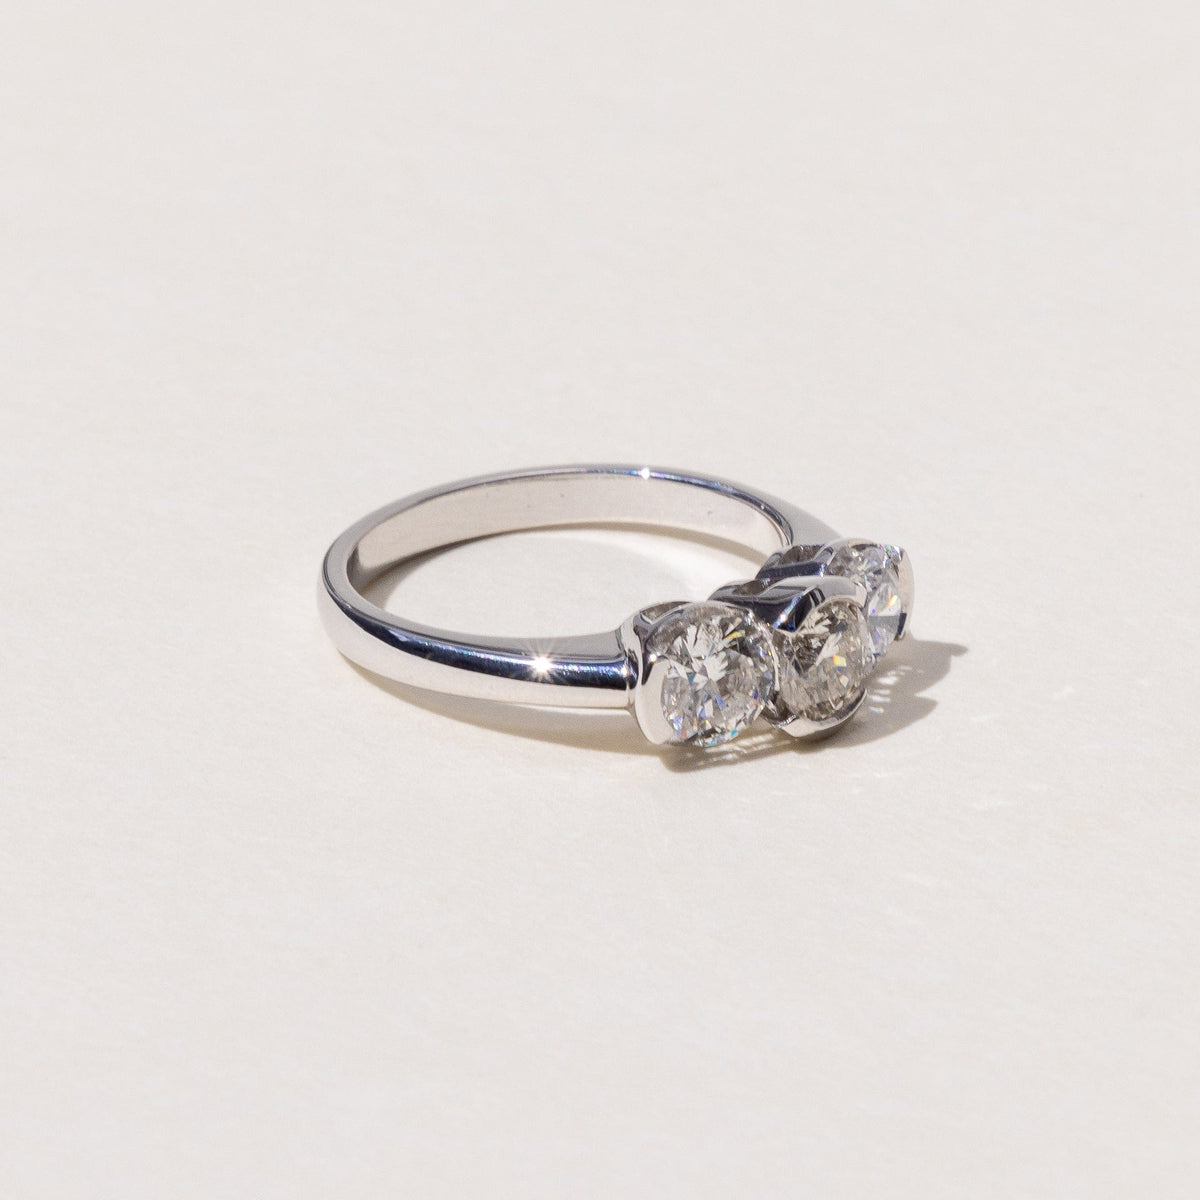 Bespoke Diamond Engagement handcrafted in our on-site workshop in Auckland NZ